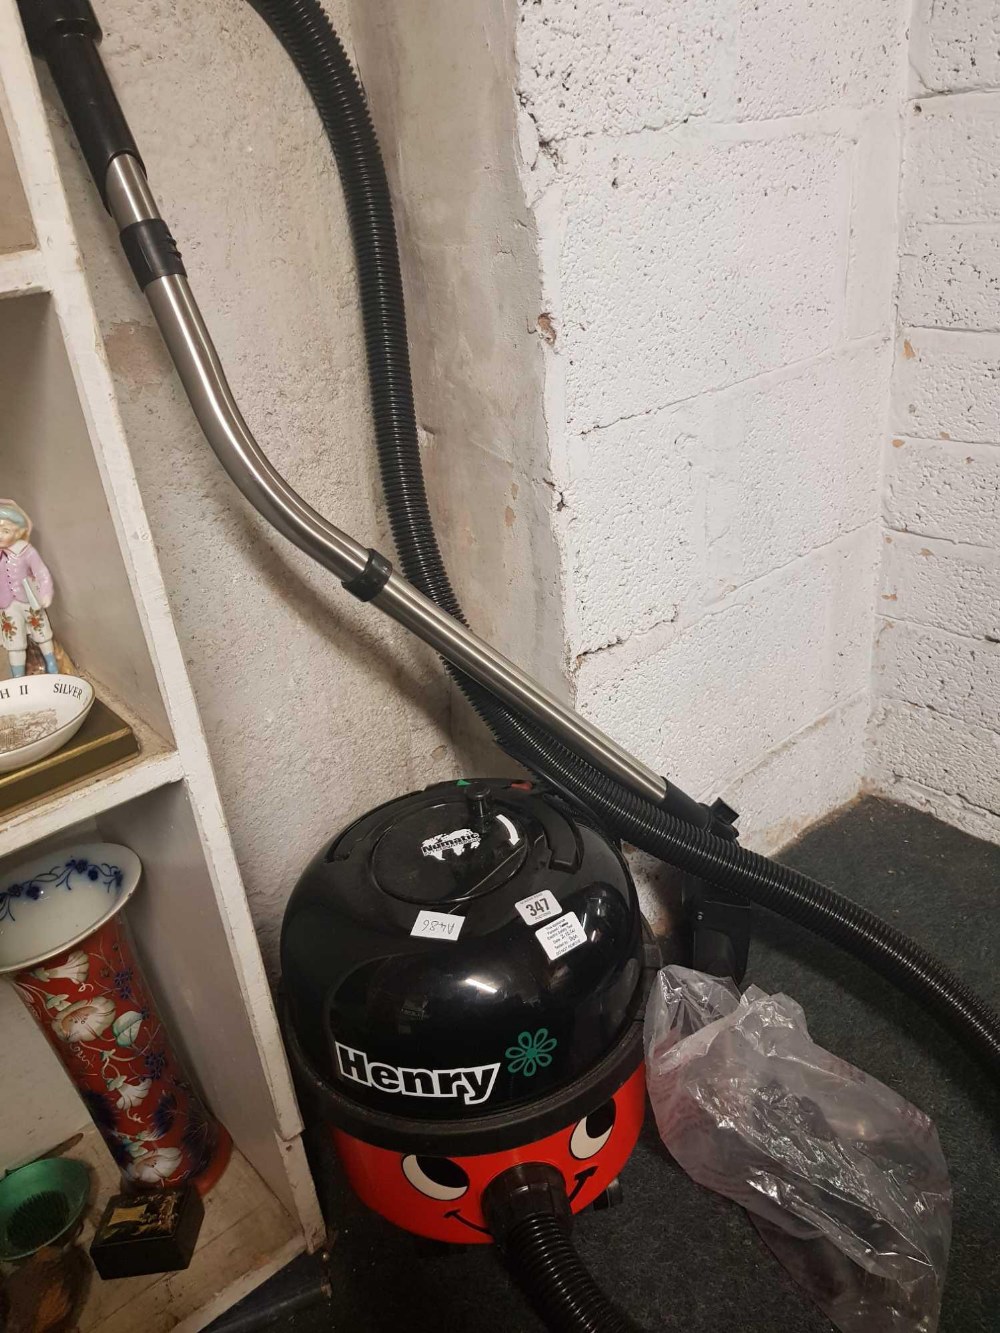 HENRY NUMATIC INTERNATIONAL VACUUM CLEANER WITH ATTACHMENTS